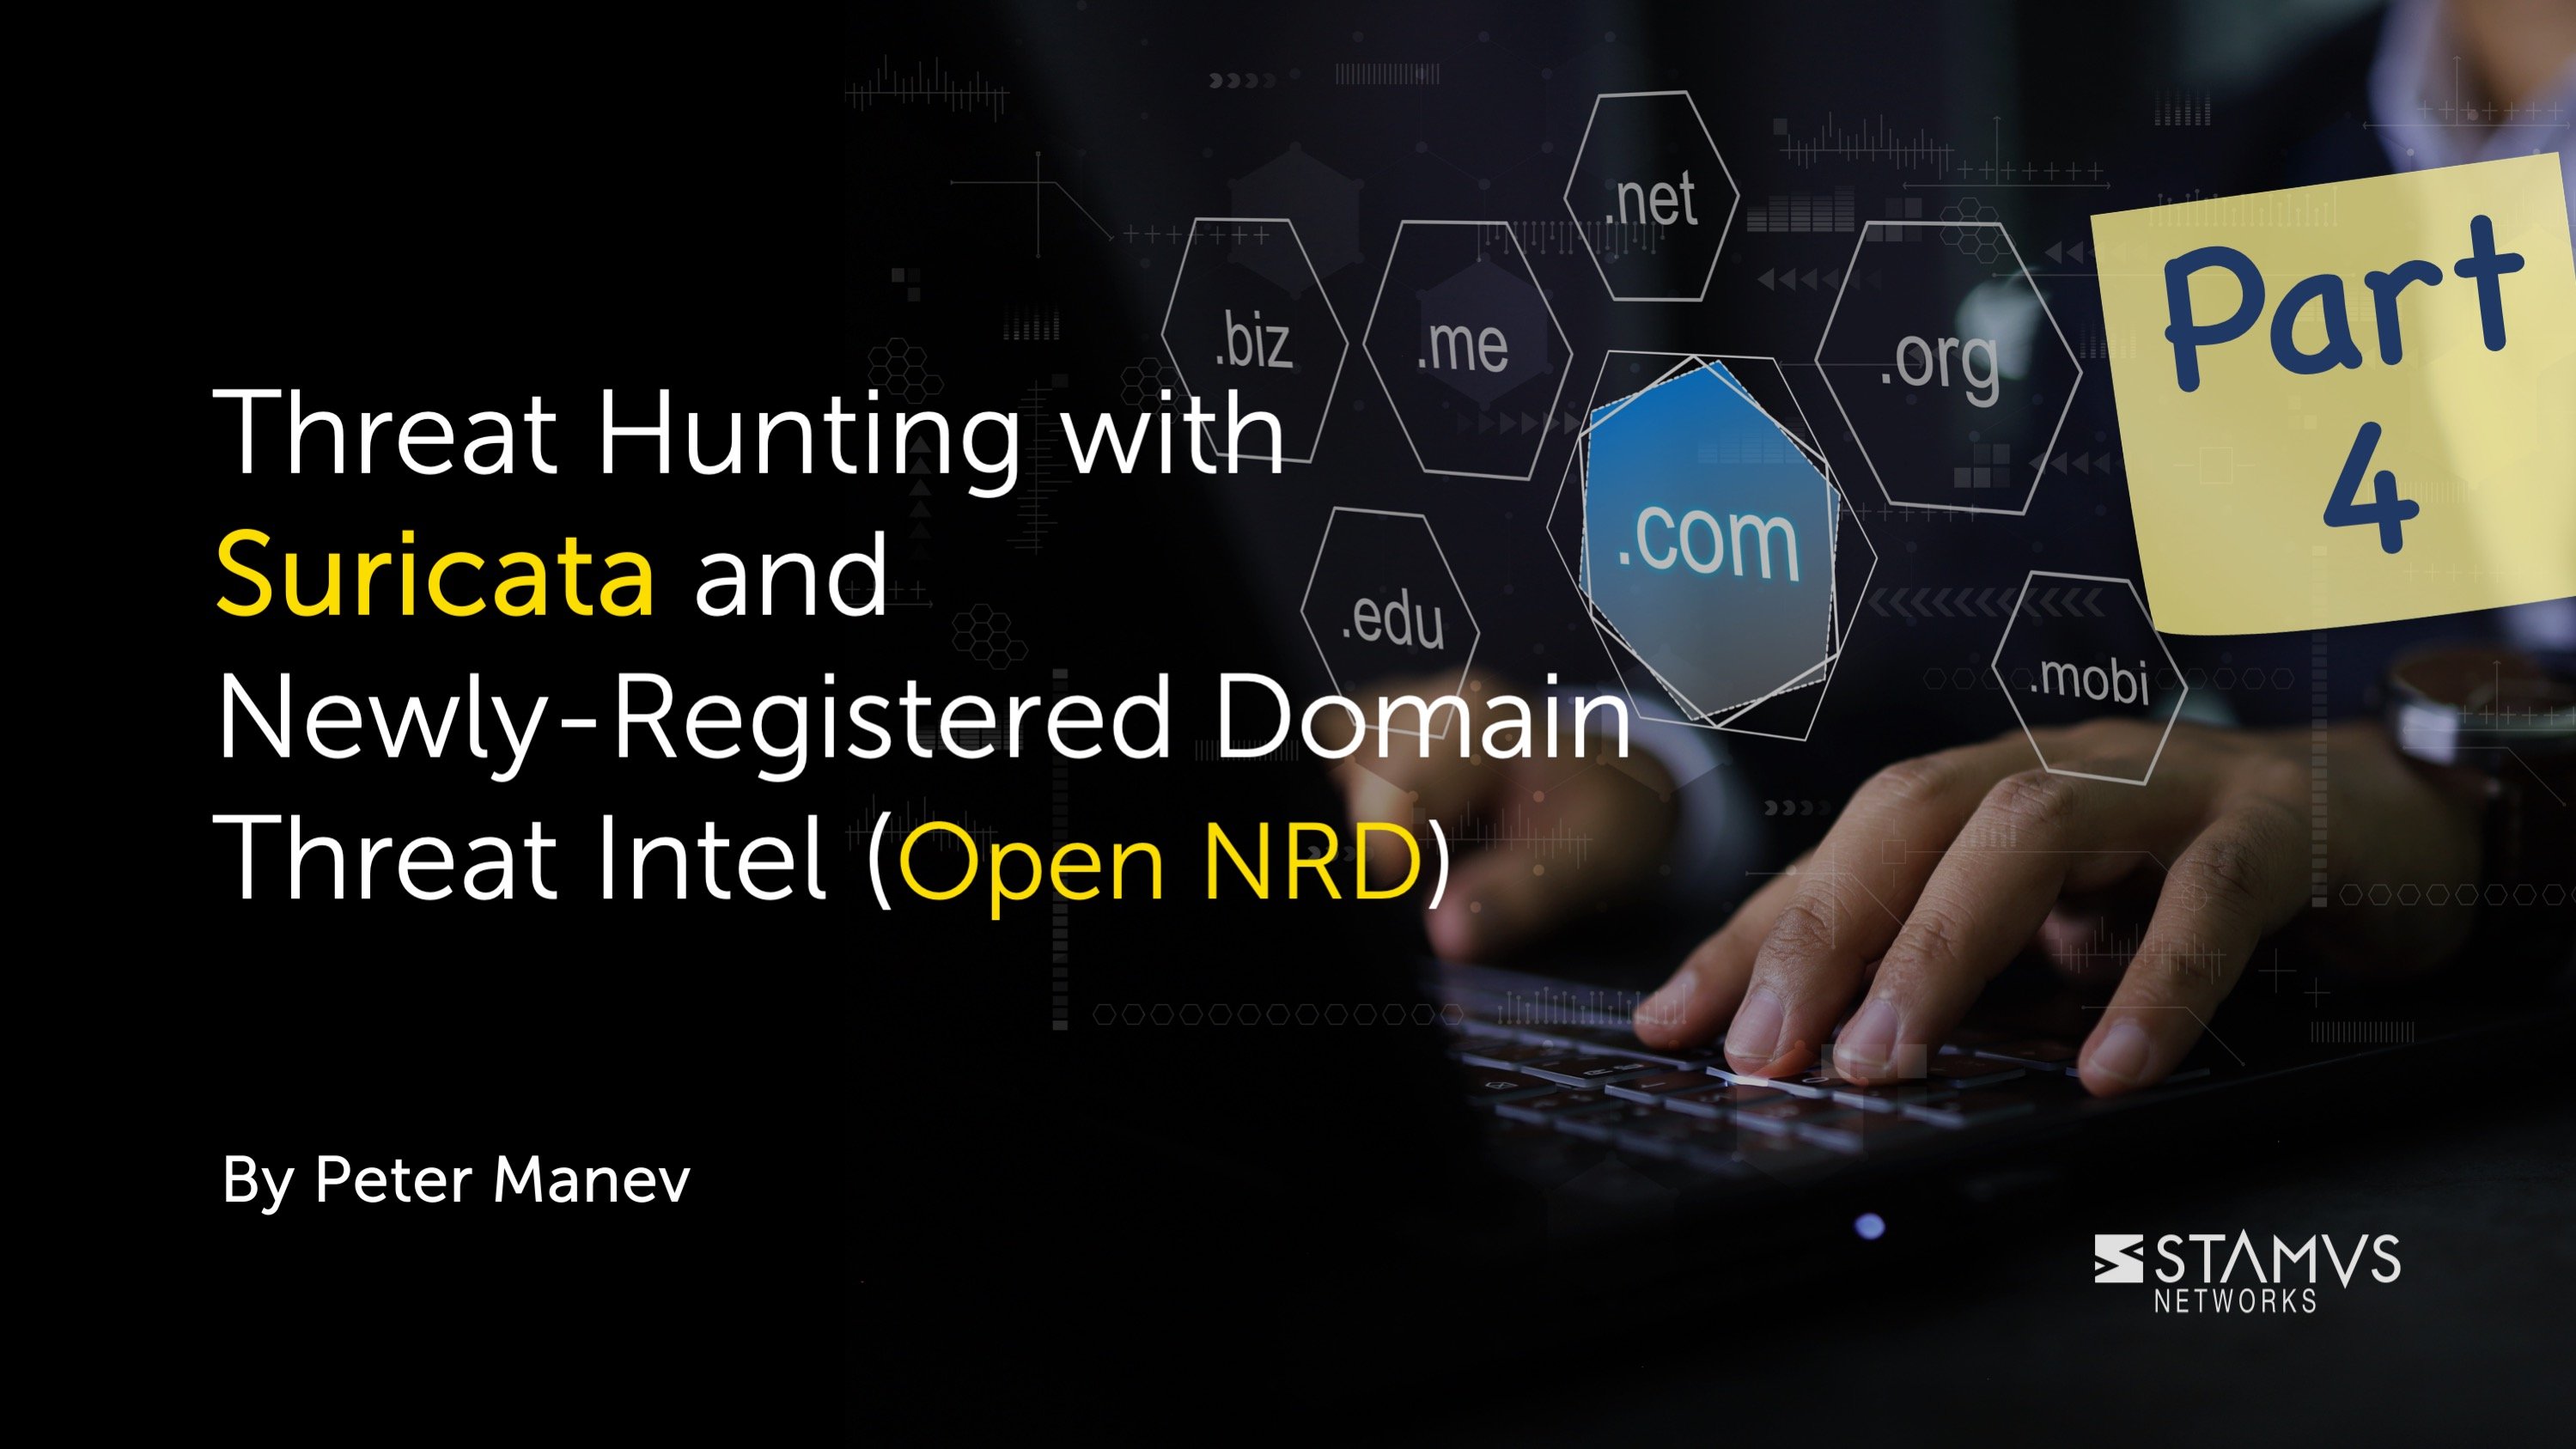 Threat Hunting with Suricata and Newly Registered Domain Threat Intel (Open NRD) by Peter Manev